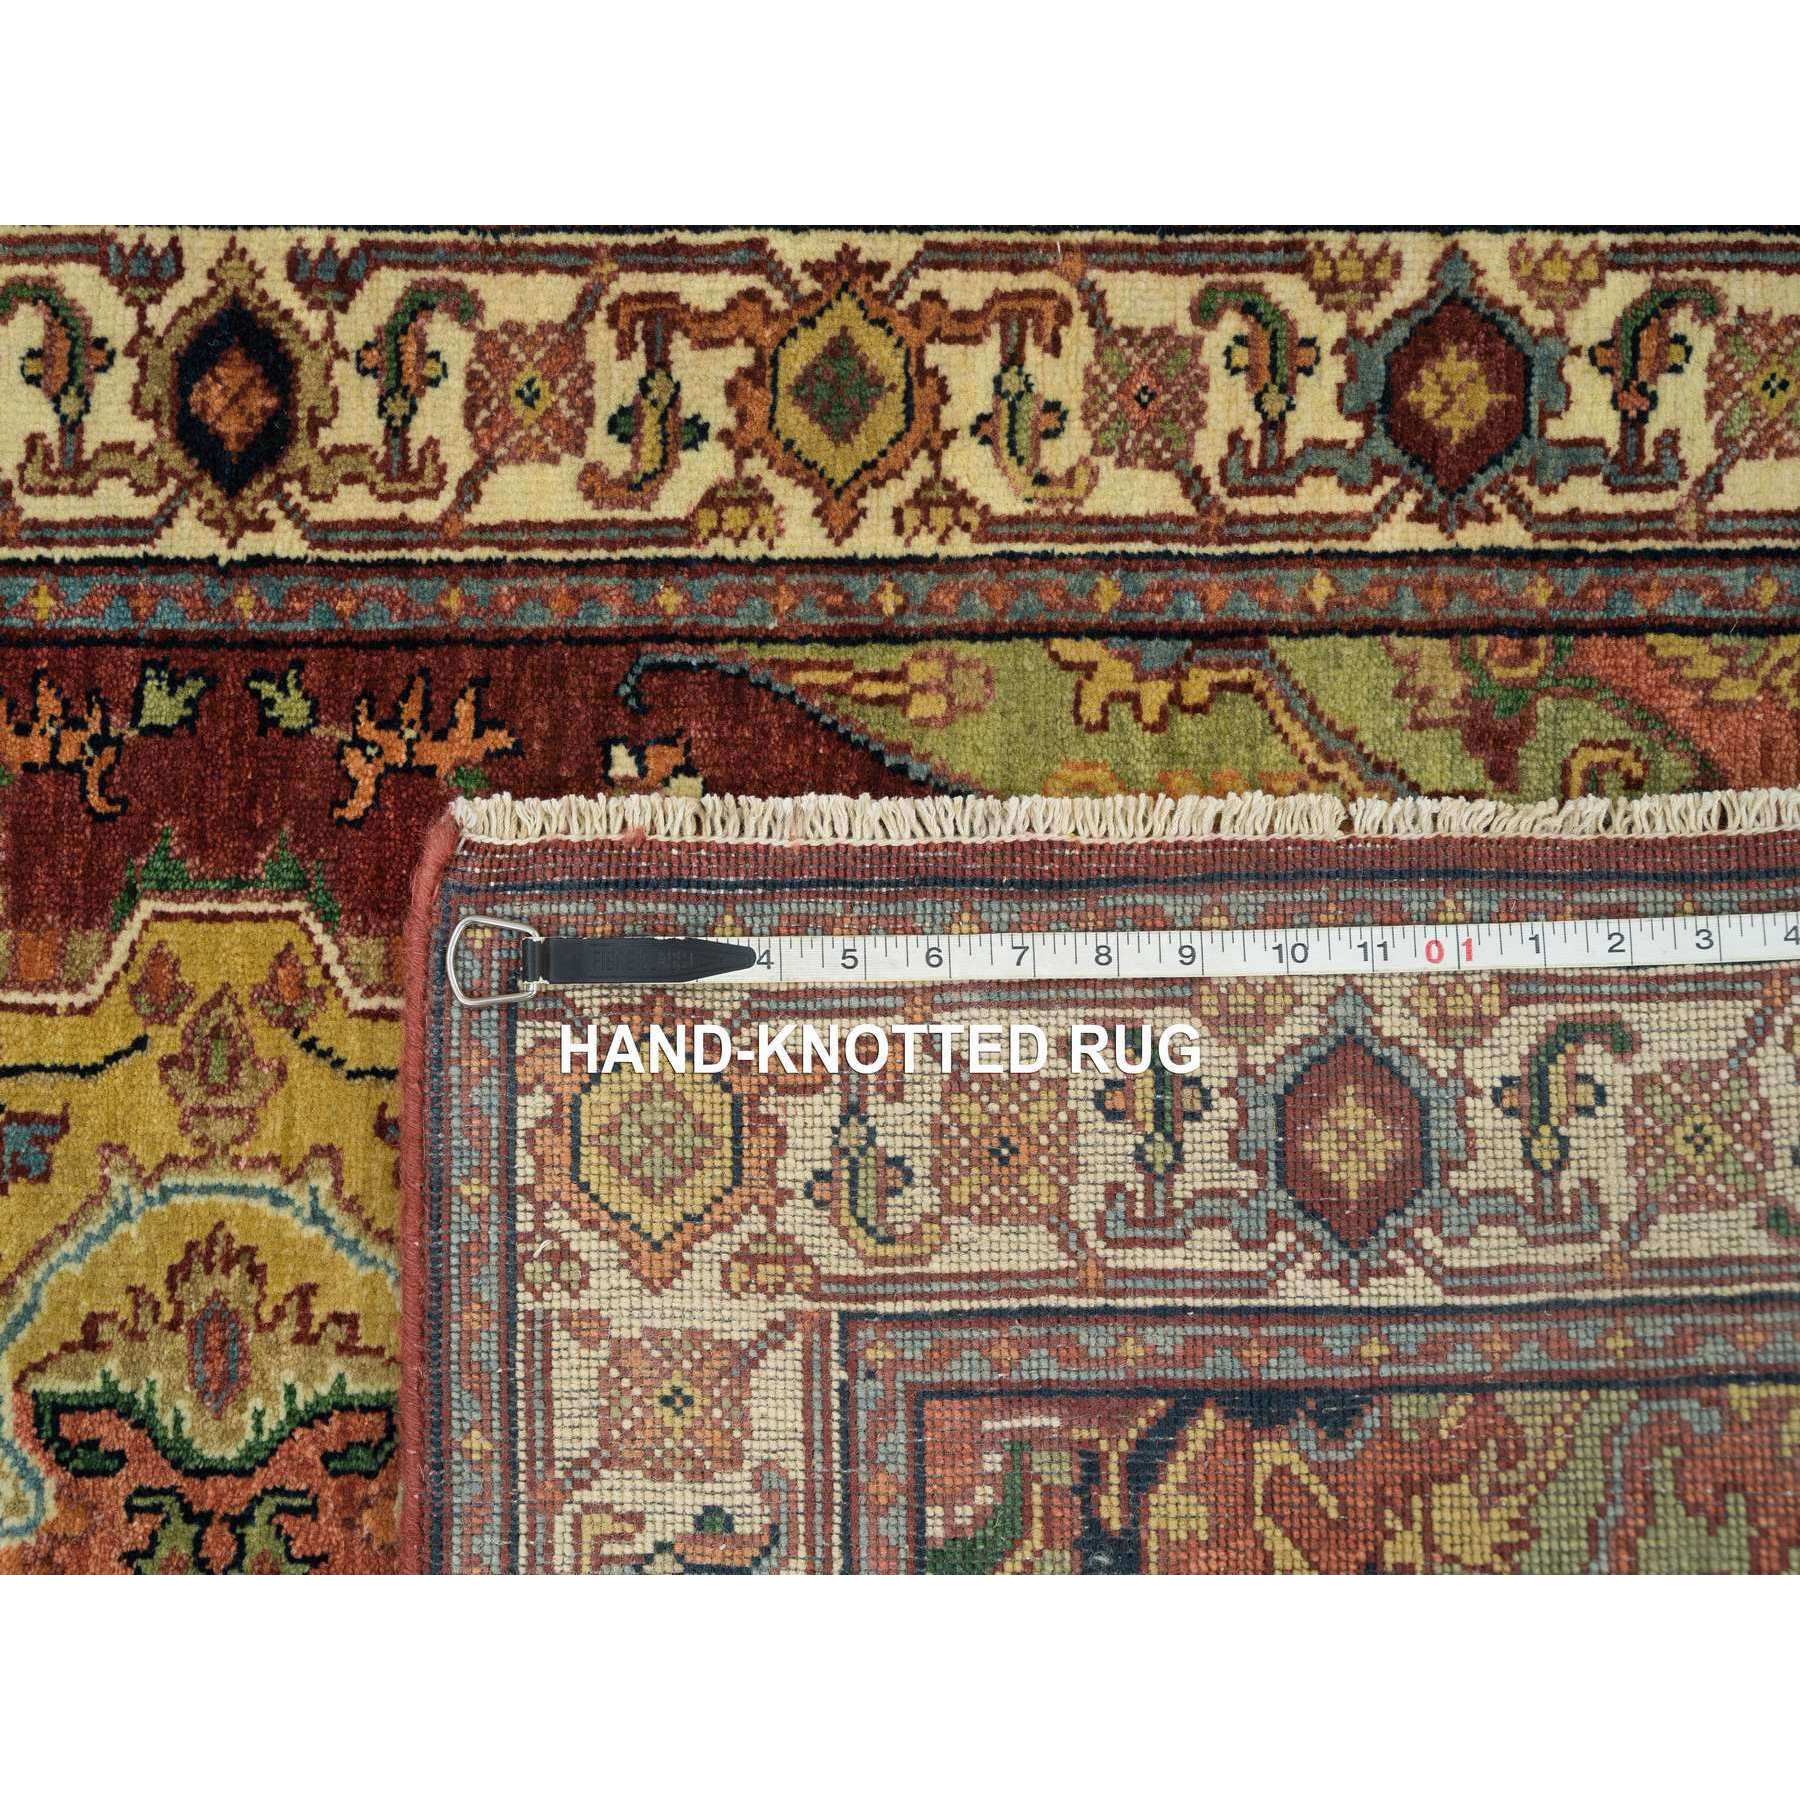 3'x5'3" Terracotta Red, Densely Woven, Natural Dyes, Soft and Plush, Organic Wool, Hand Woven, Antiqued Fine Heriz Re-Creation, Oriental Rug 